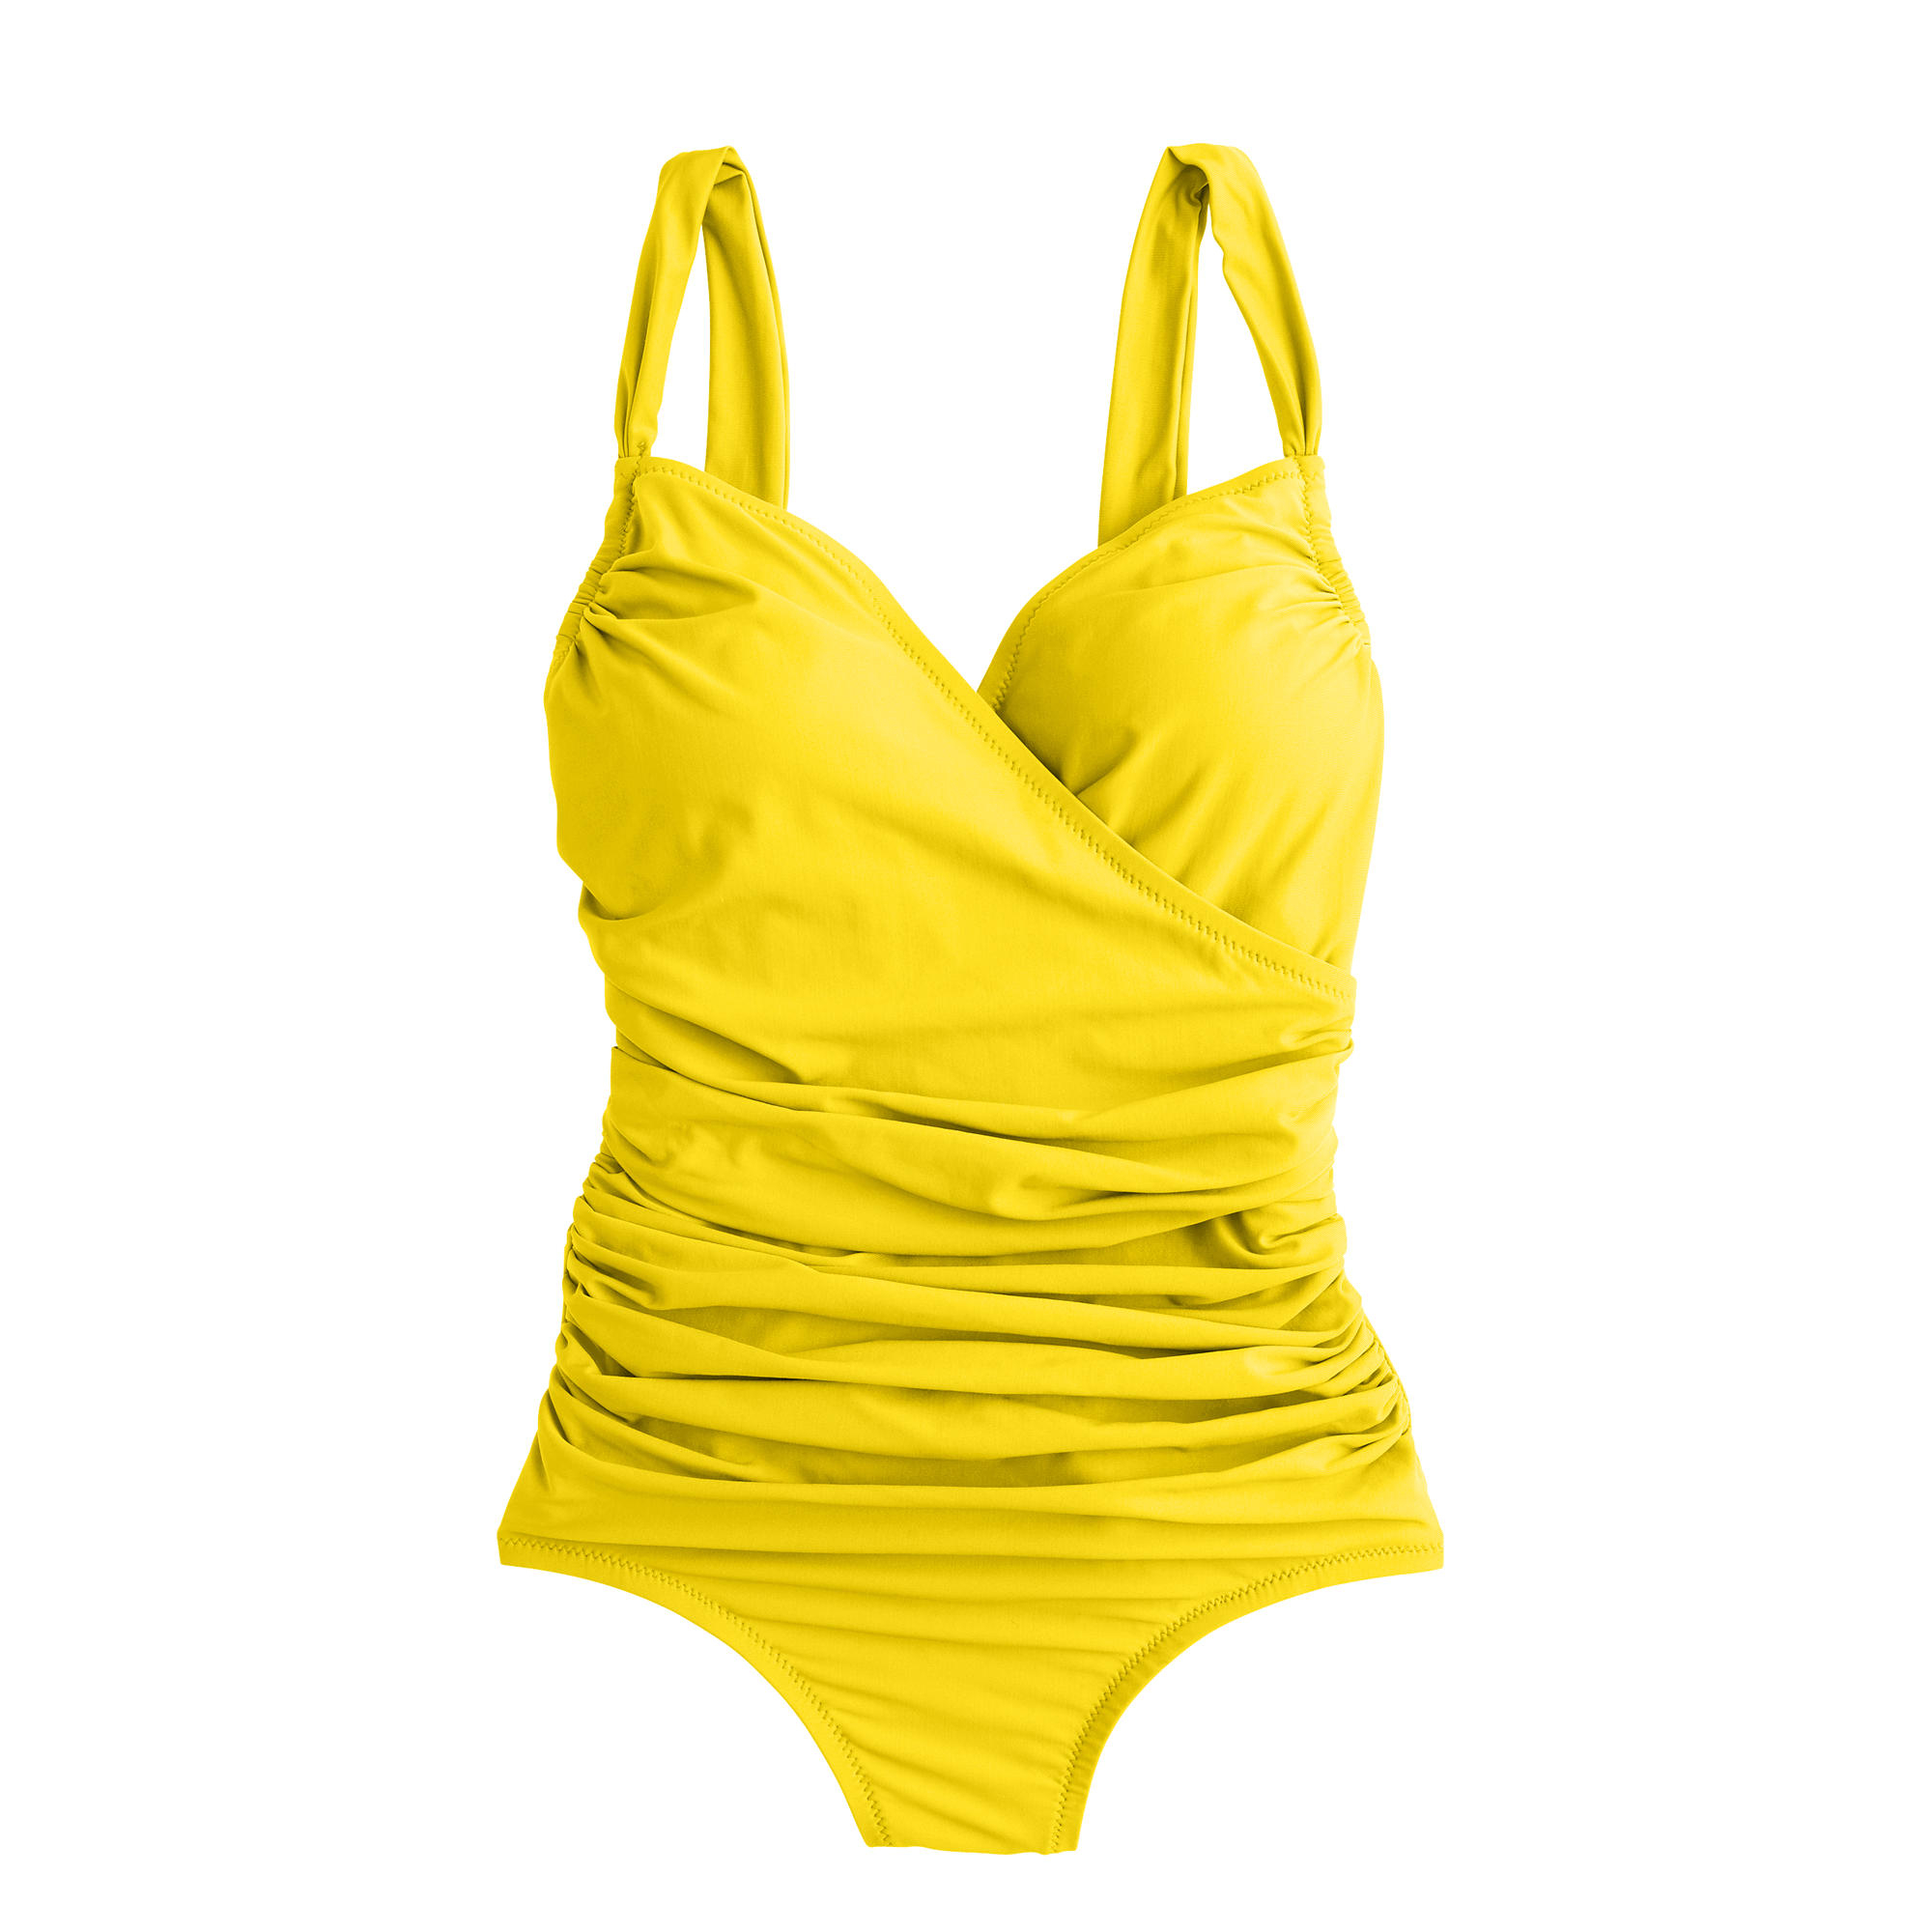 J.crew Ruched Wrap One-Piece Swimsuit in Yellow (crisp yellow) | Lyst